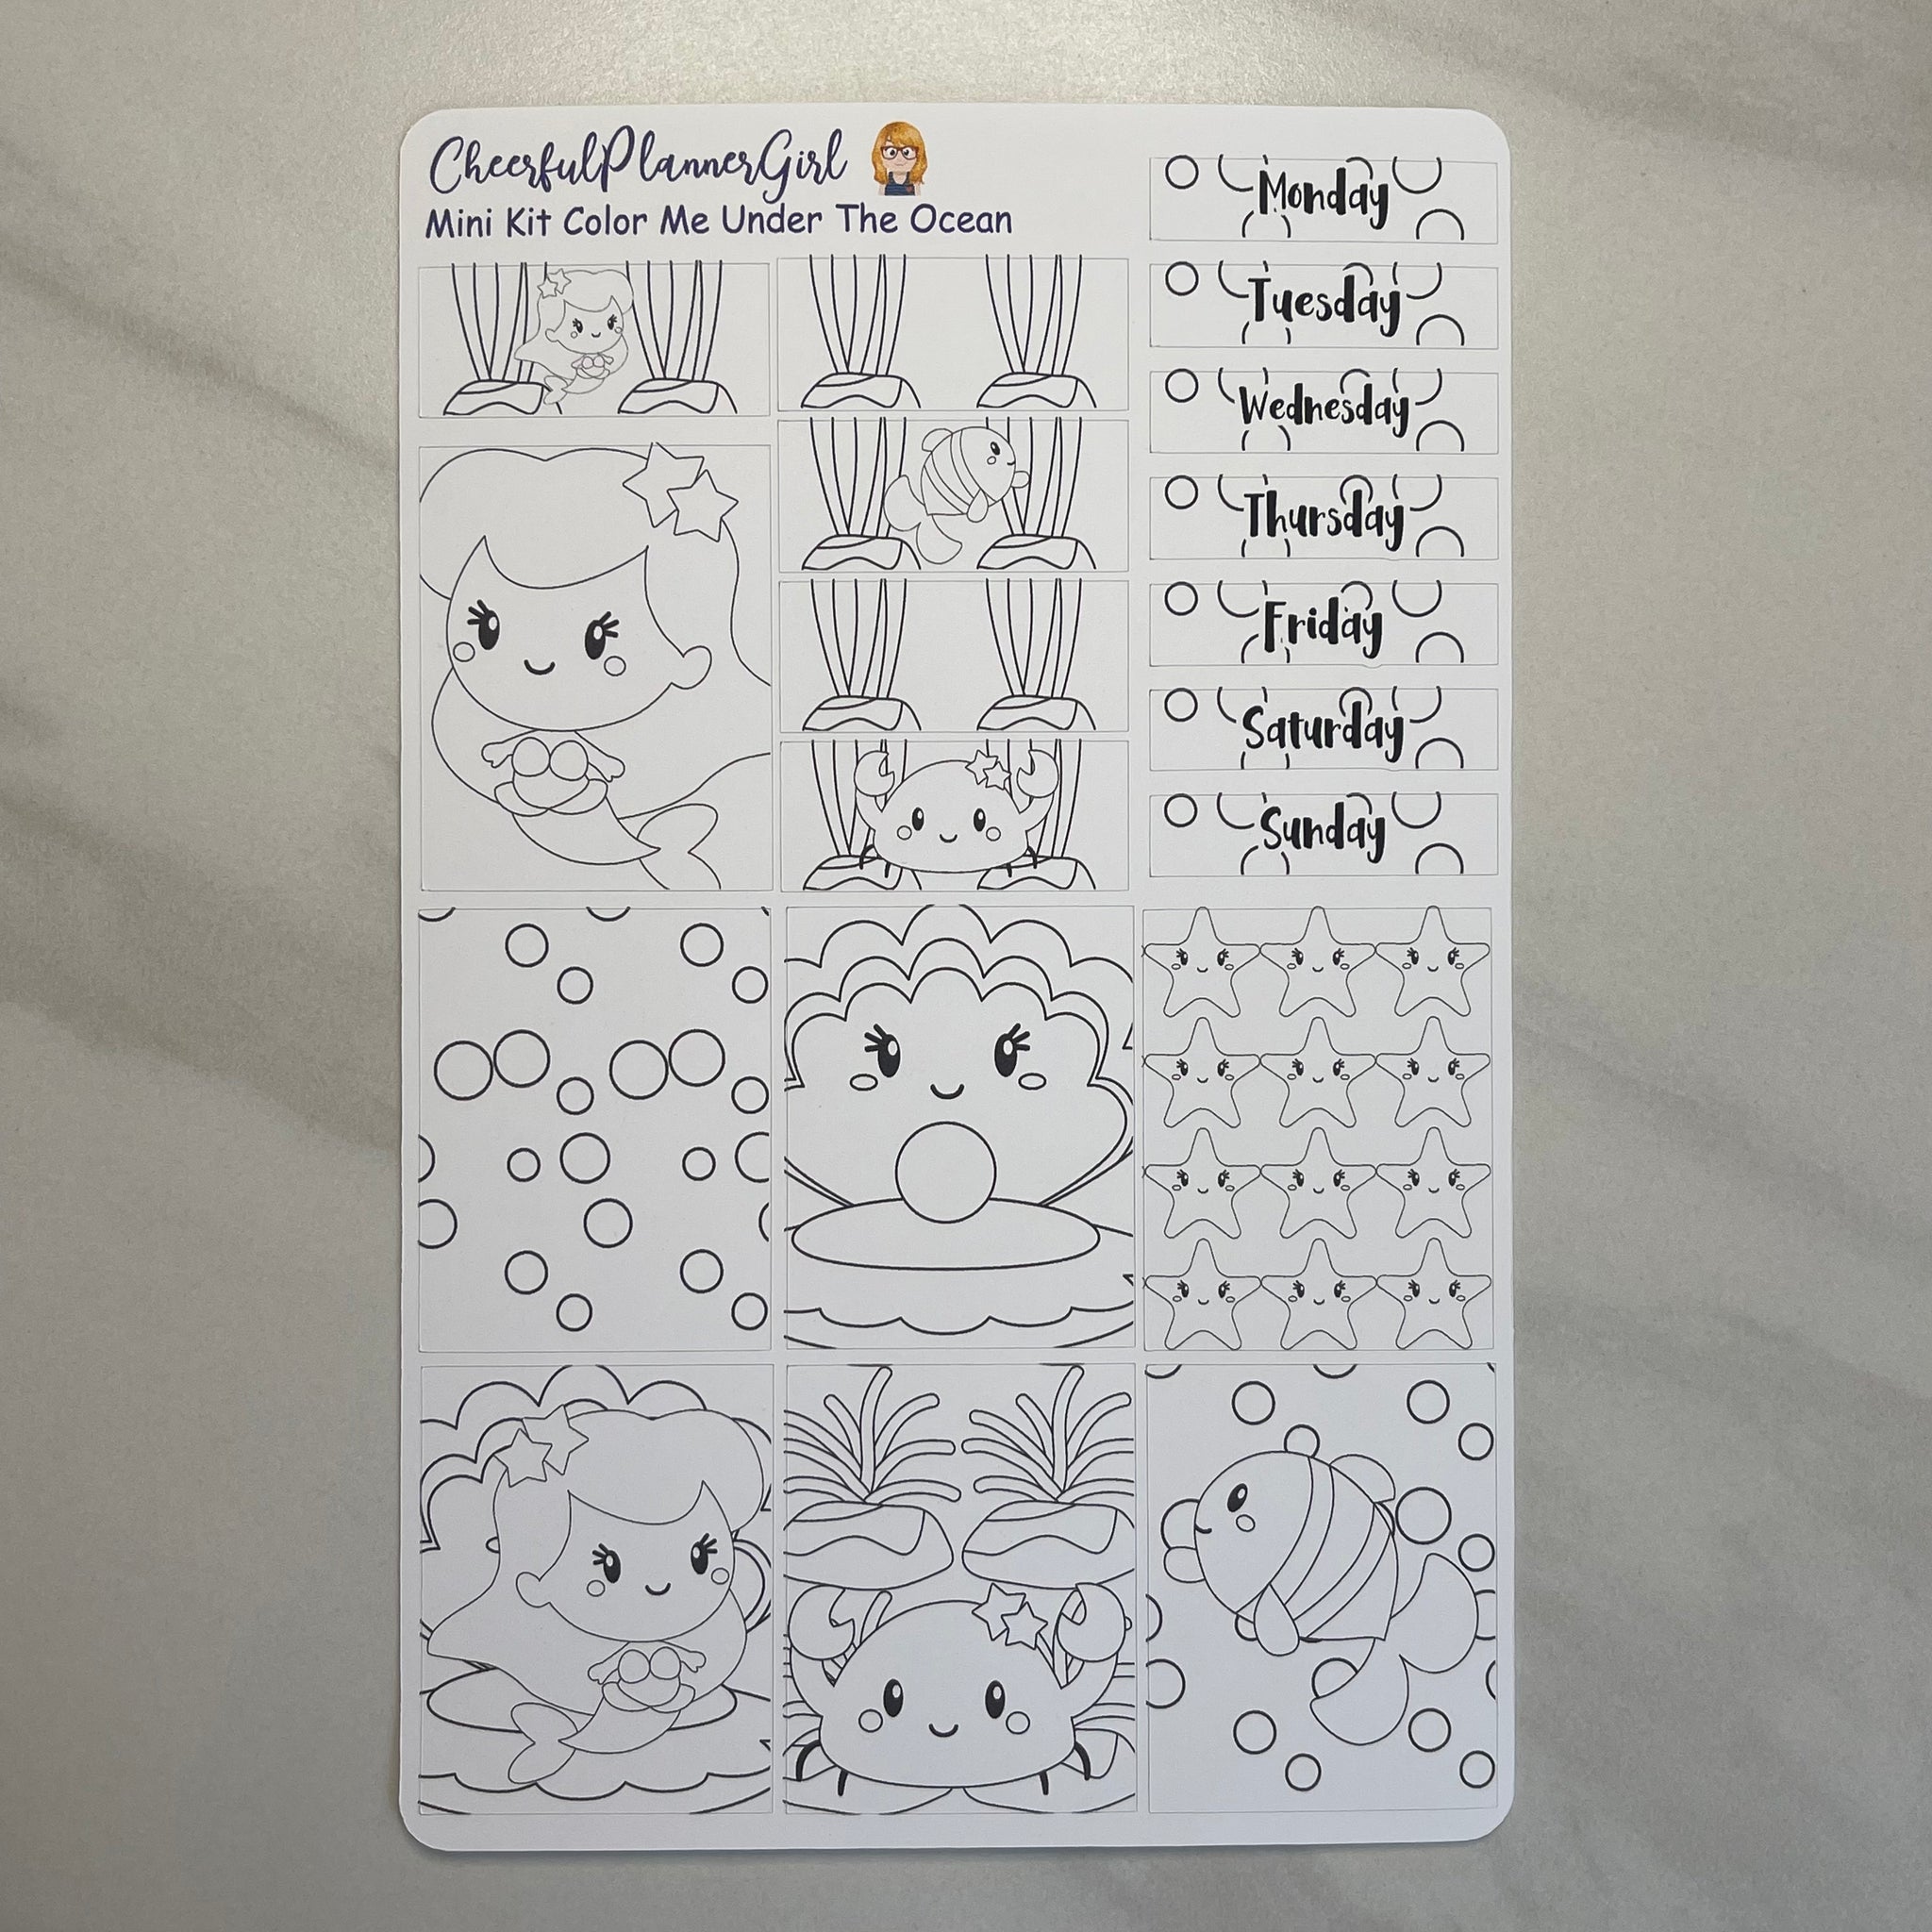 Color Me Under the Ocean Mini Kit Weekly Layout Planner Stickers